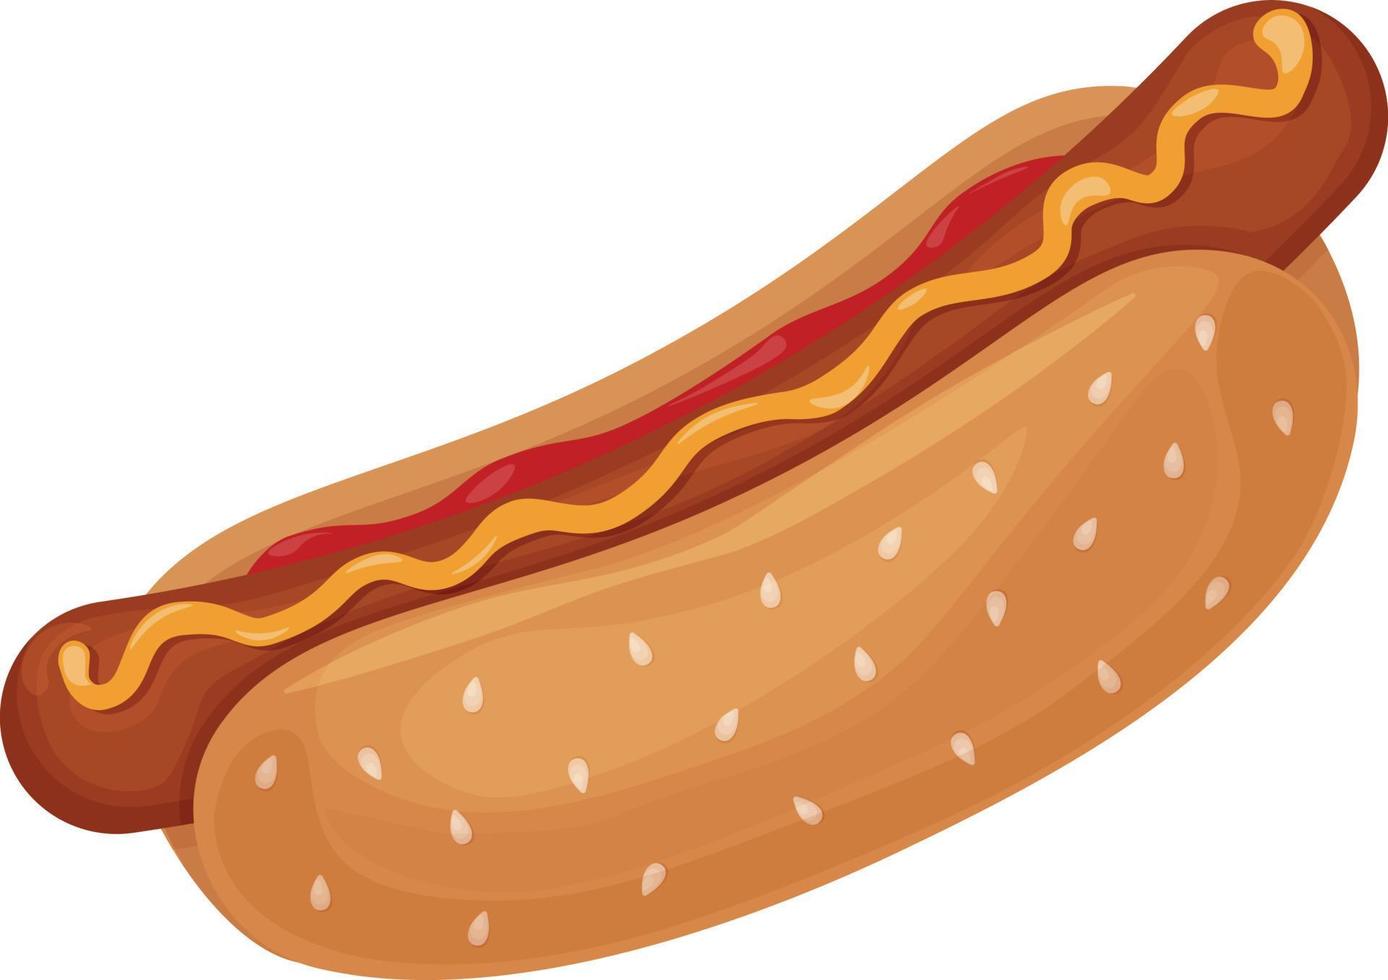 Hot dog. Image of a hot dog with sausage with ketchup and sprinkled with mustard. Fast food. Vector illustration isolated on a white background